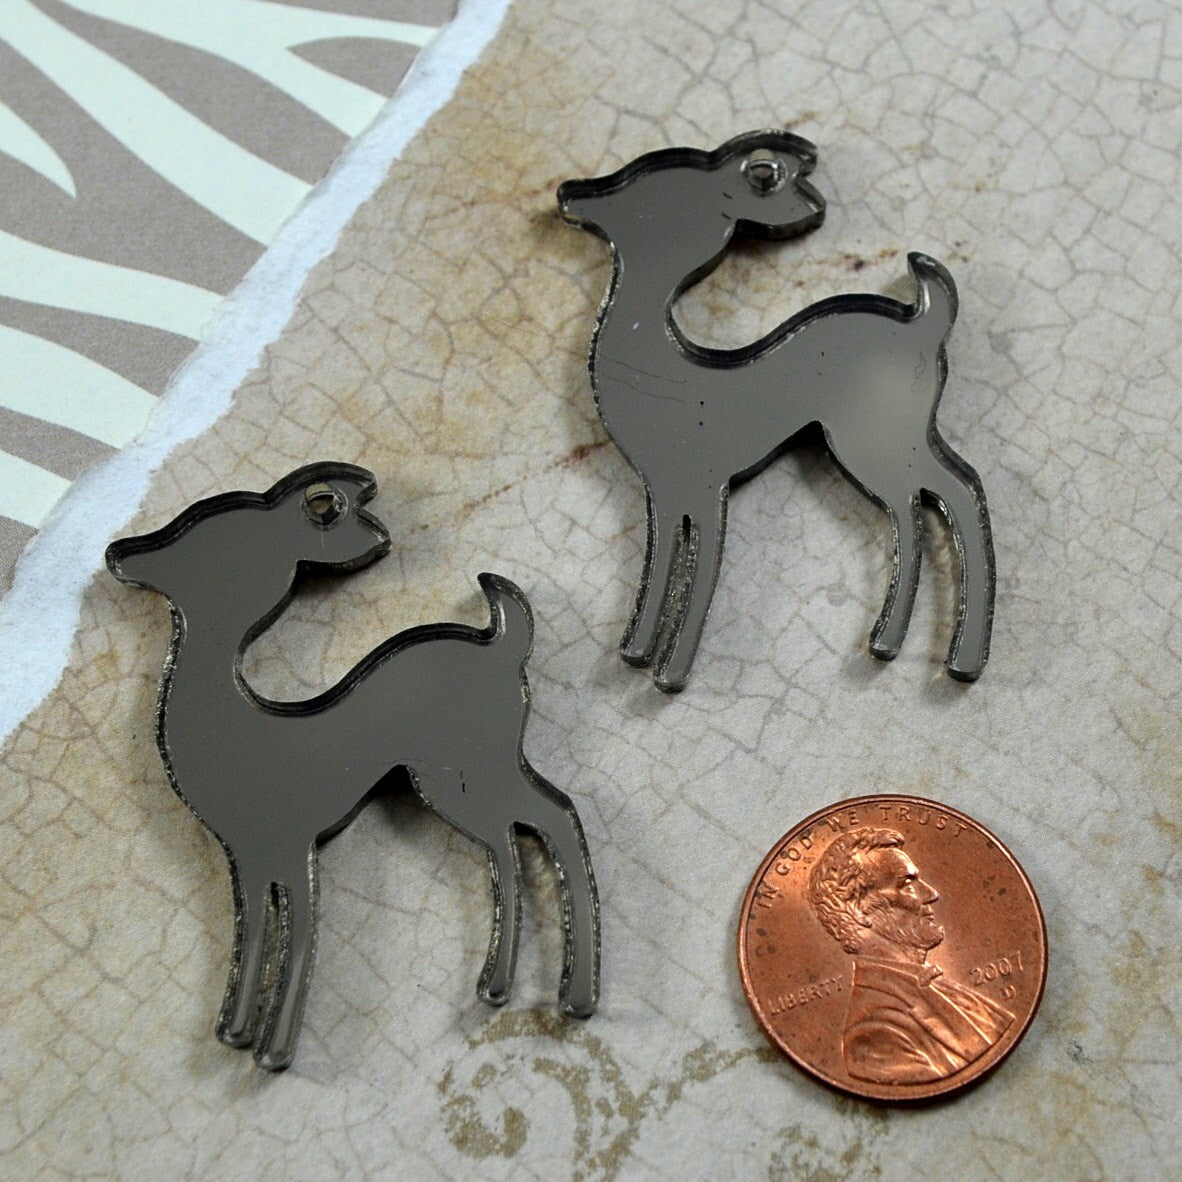 BRONZE MIRROR DEER Charms - Set of 2 Charms in Laser Cut Acrylic